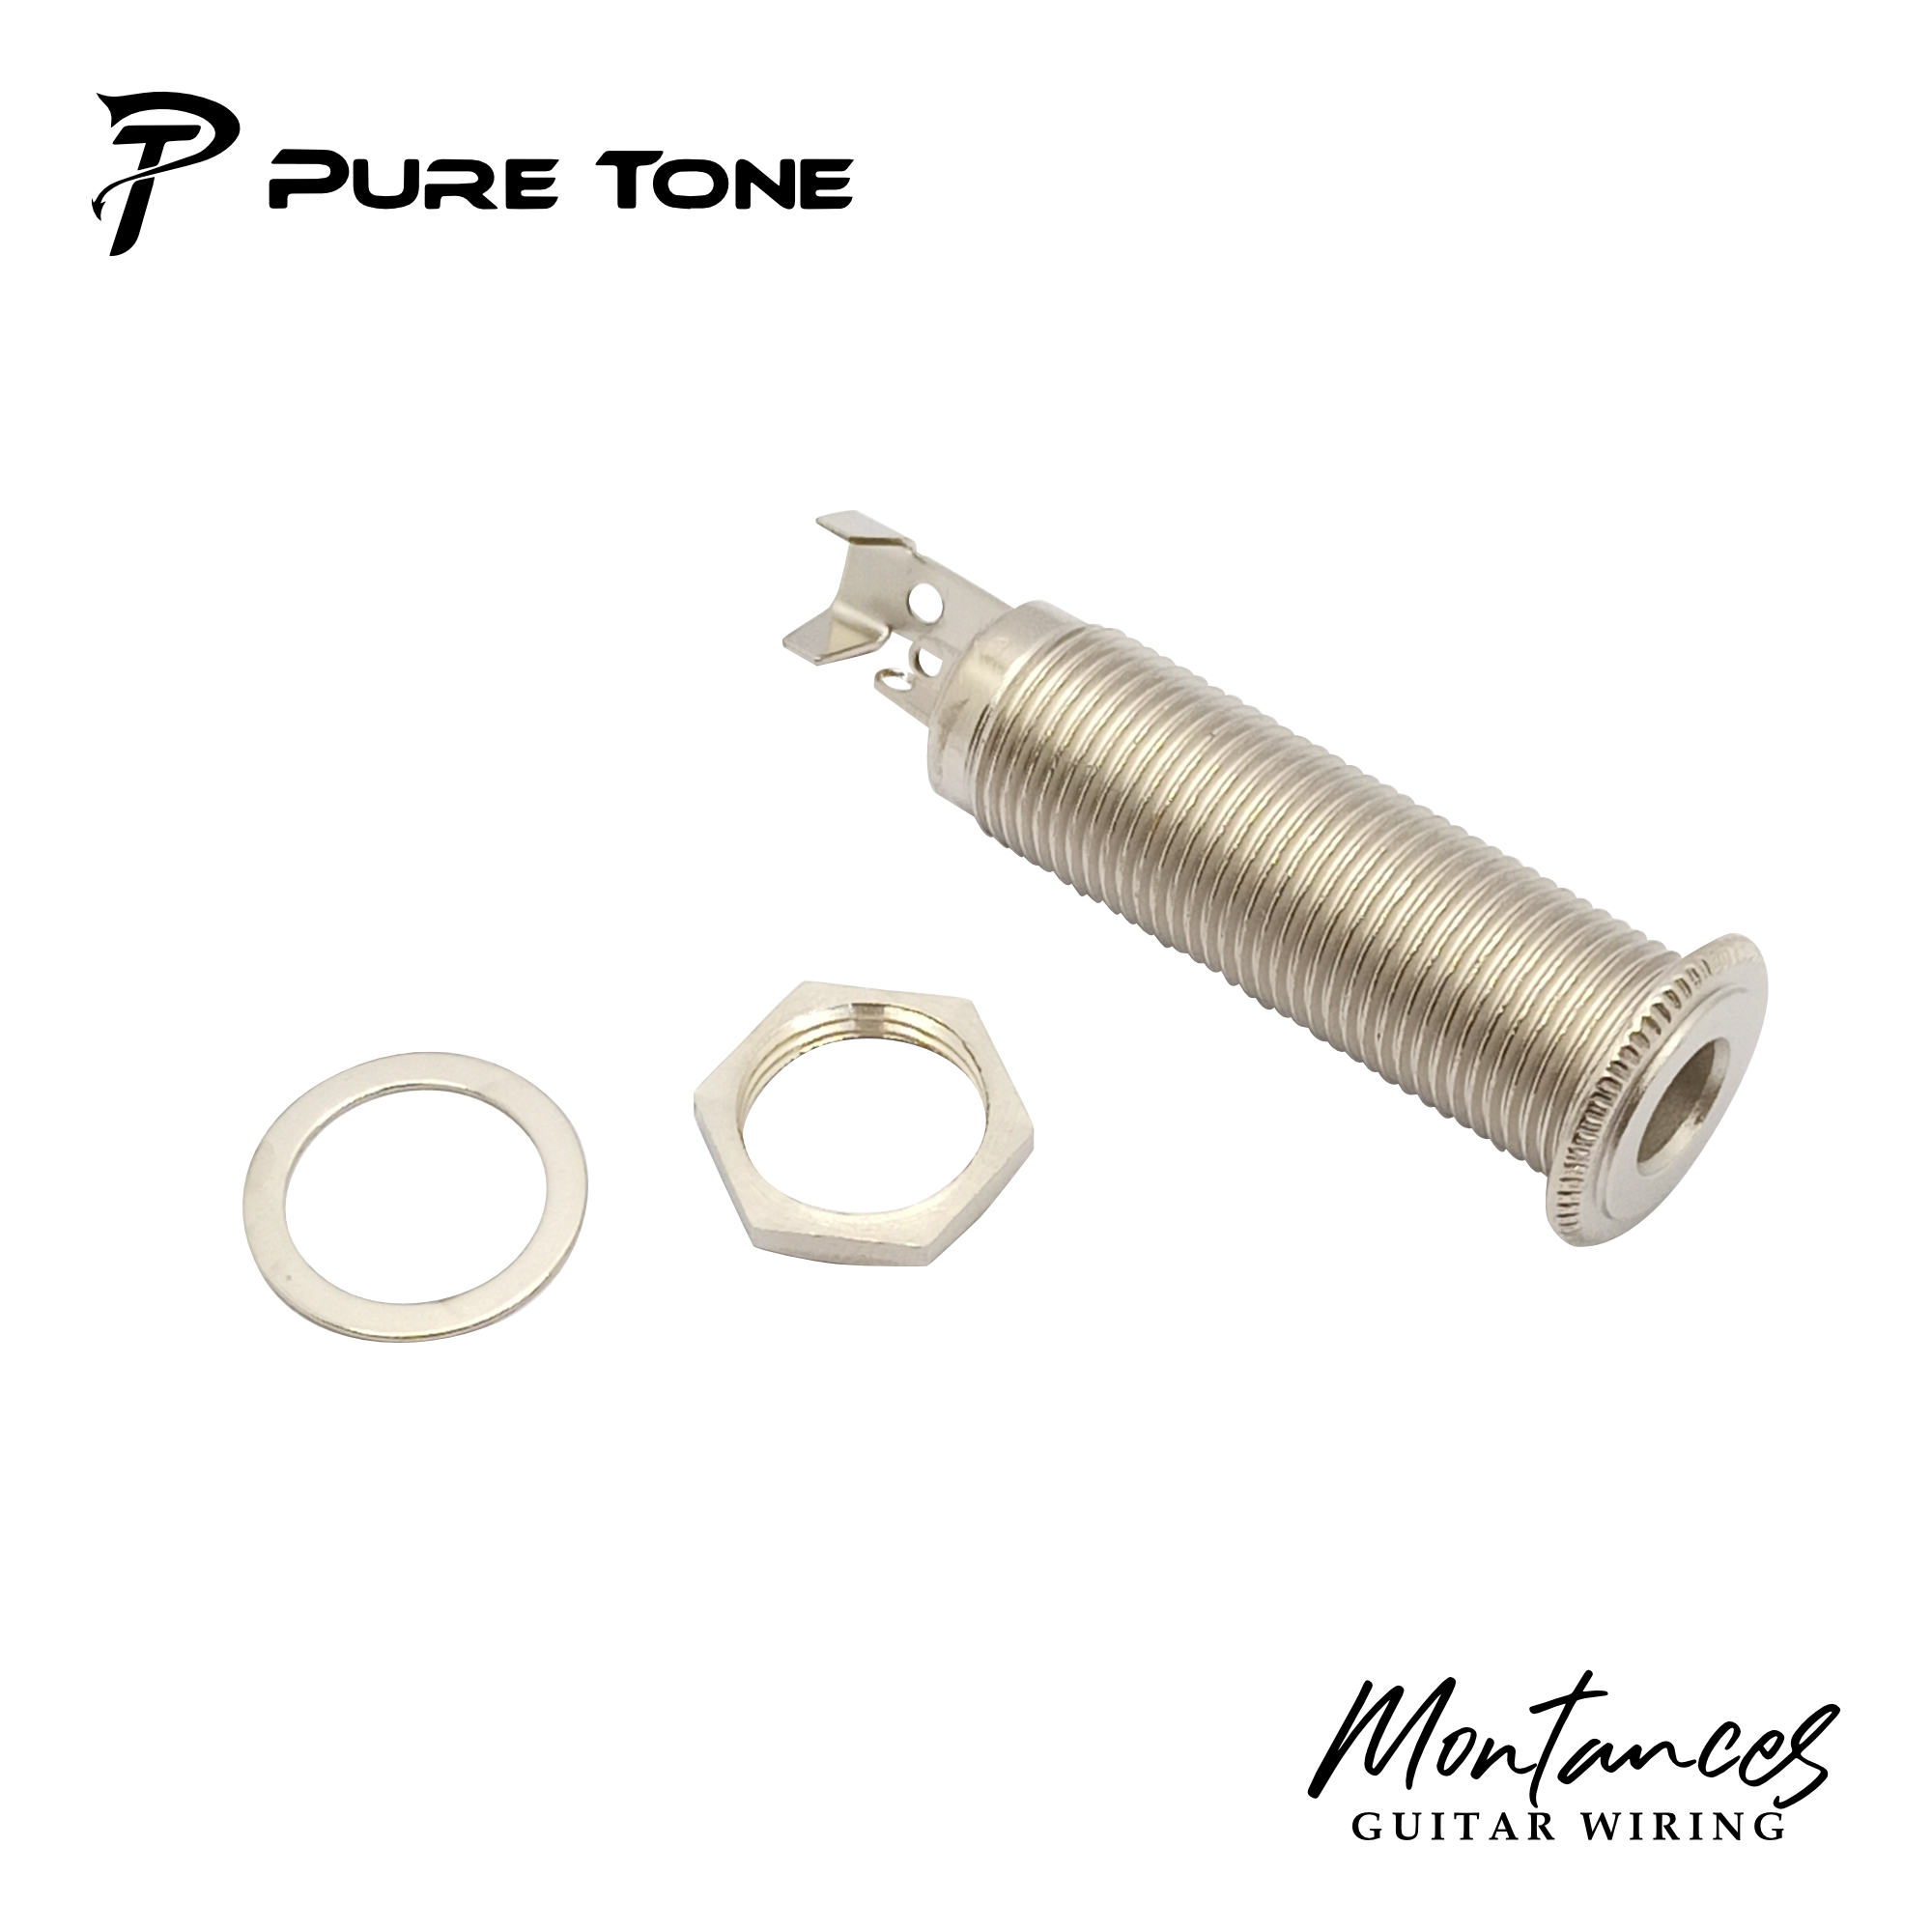 Pure Tone® Stereo Barrel Type Multi-Contact Ouput Jack Made in USA